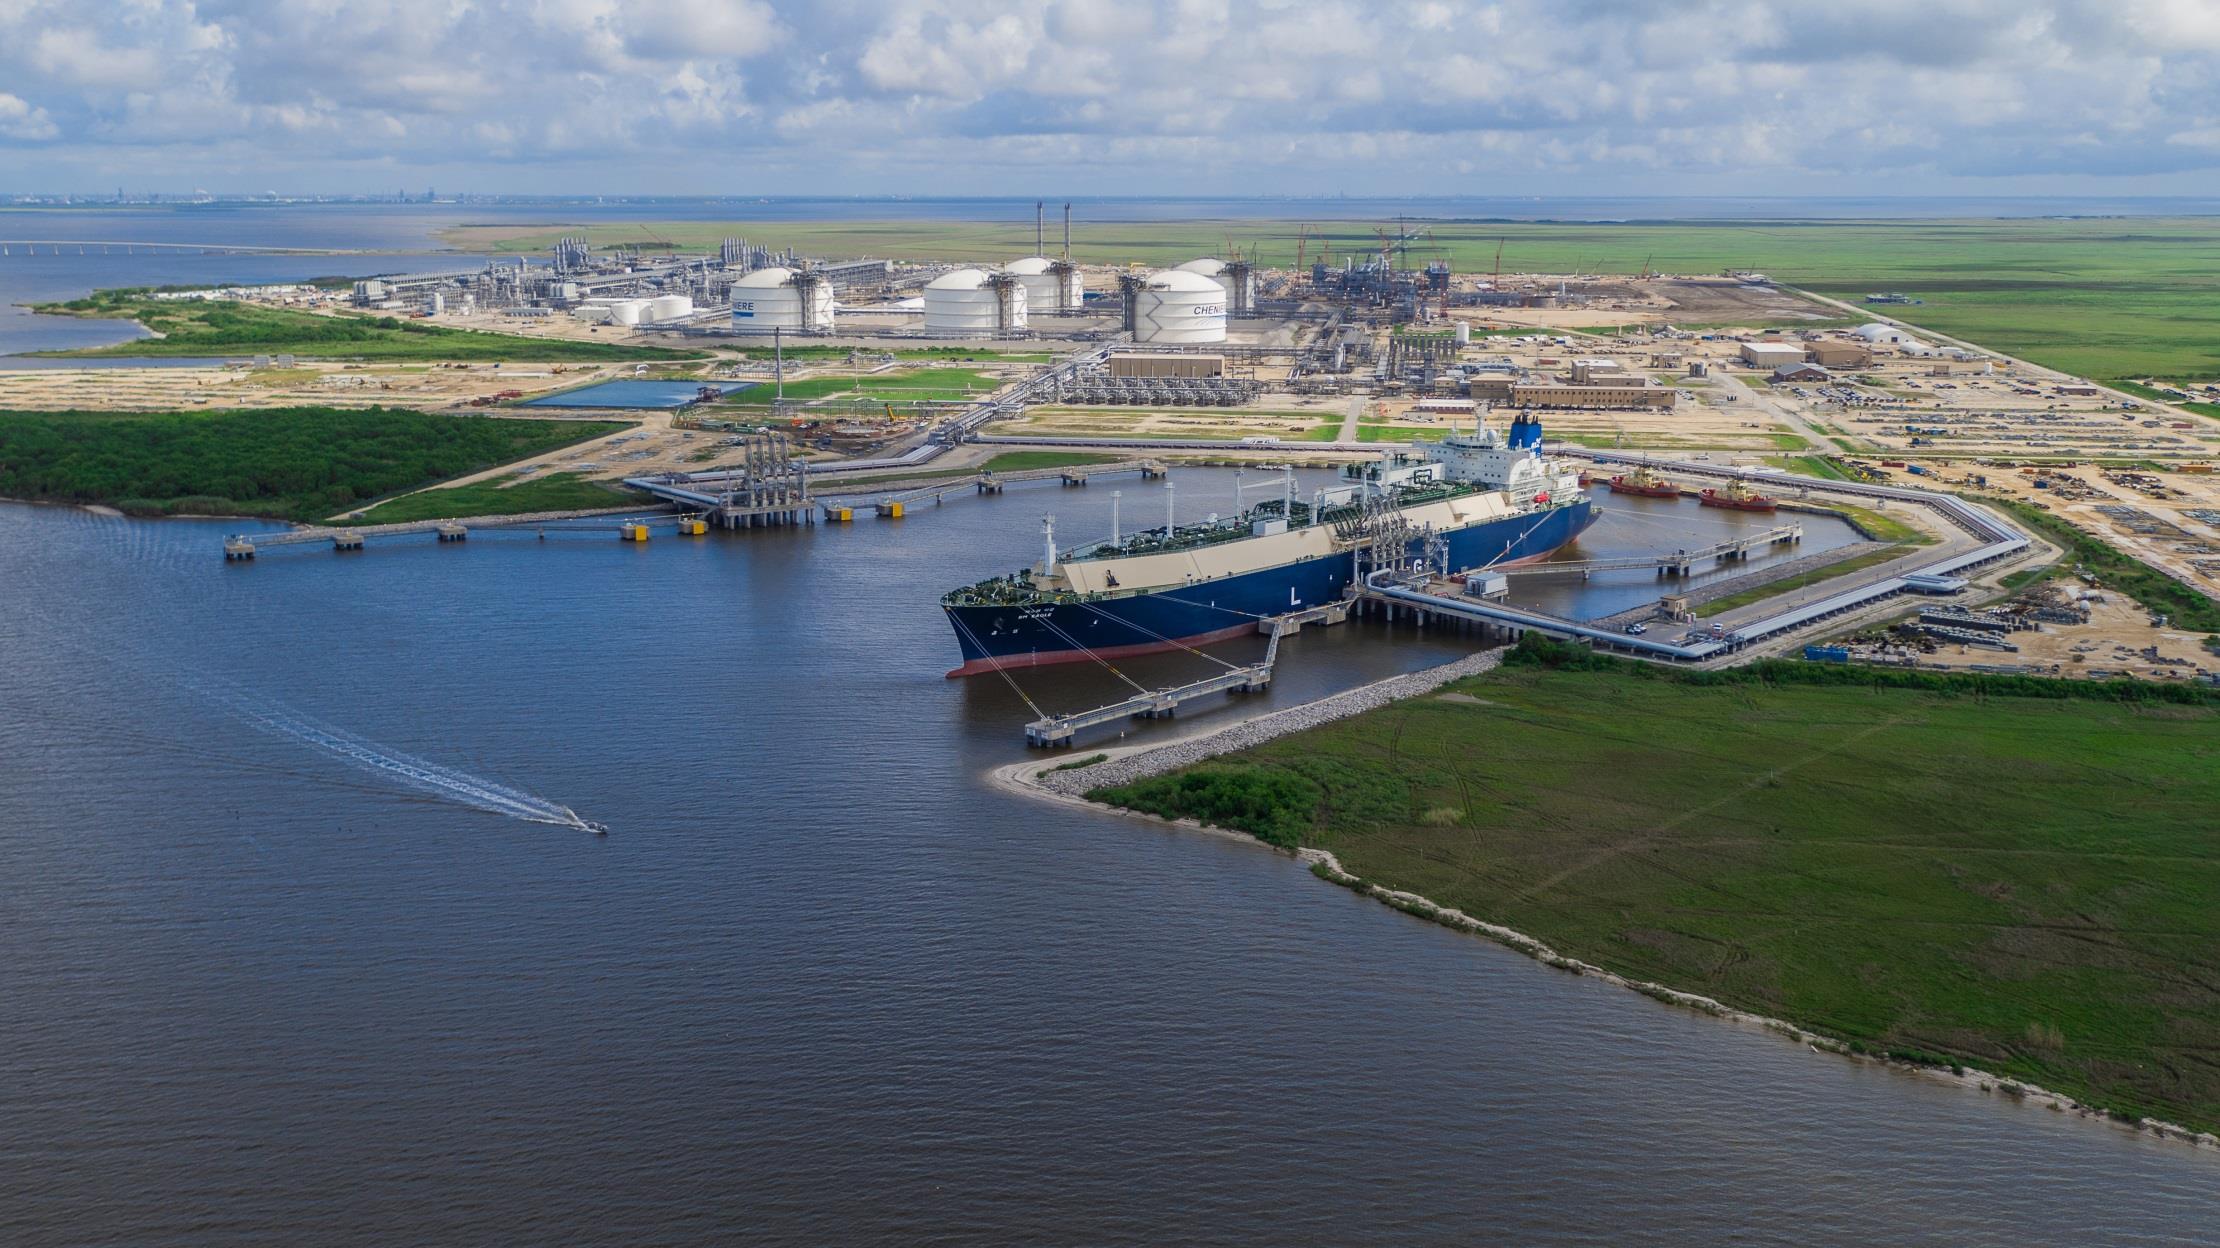 Centrica's first LNG cargo under deal with Cheniere leaves Sabine Pass